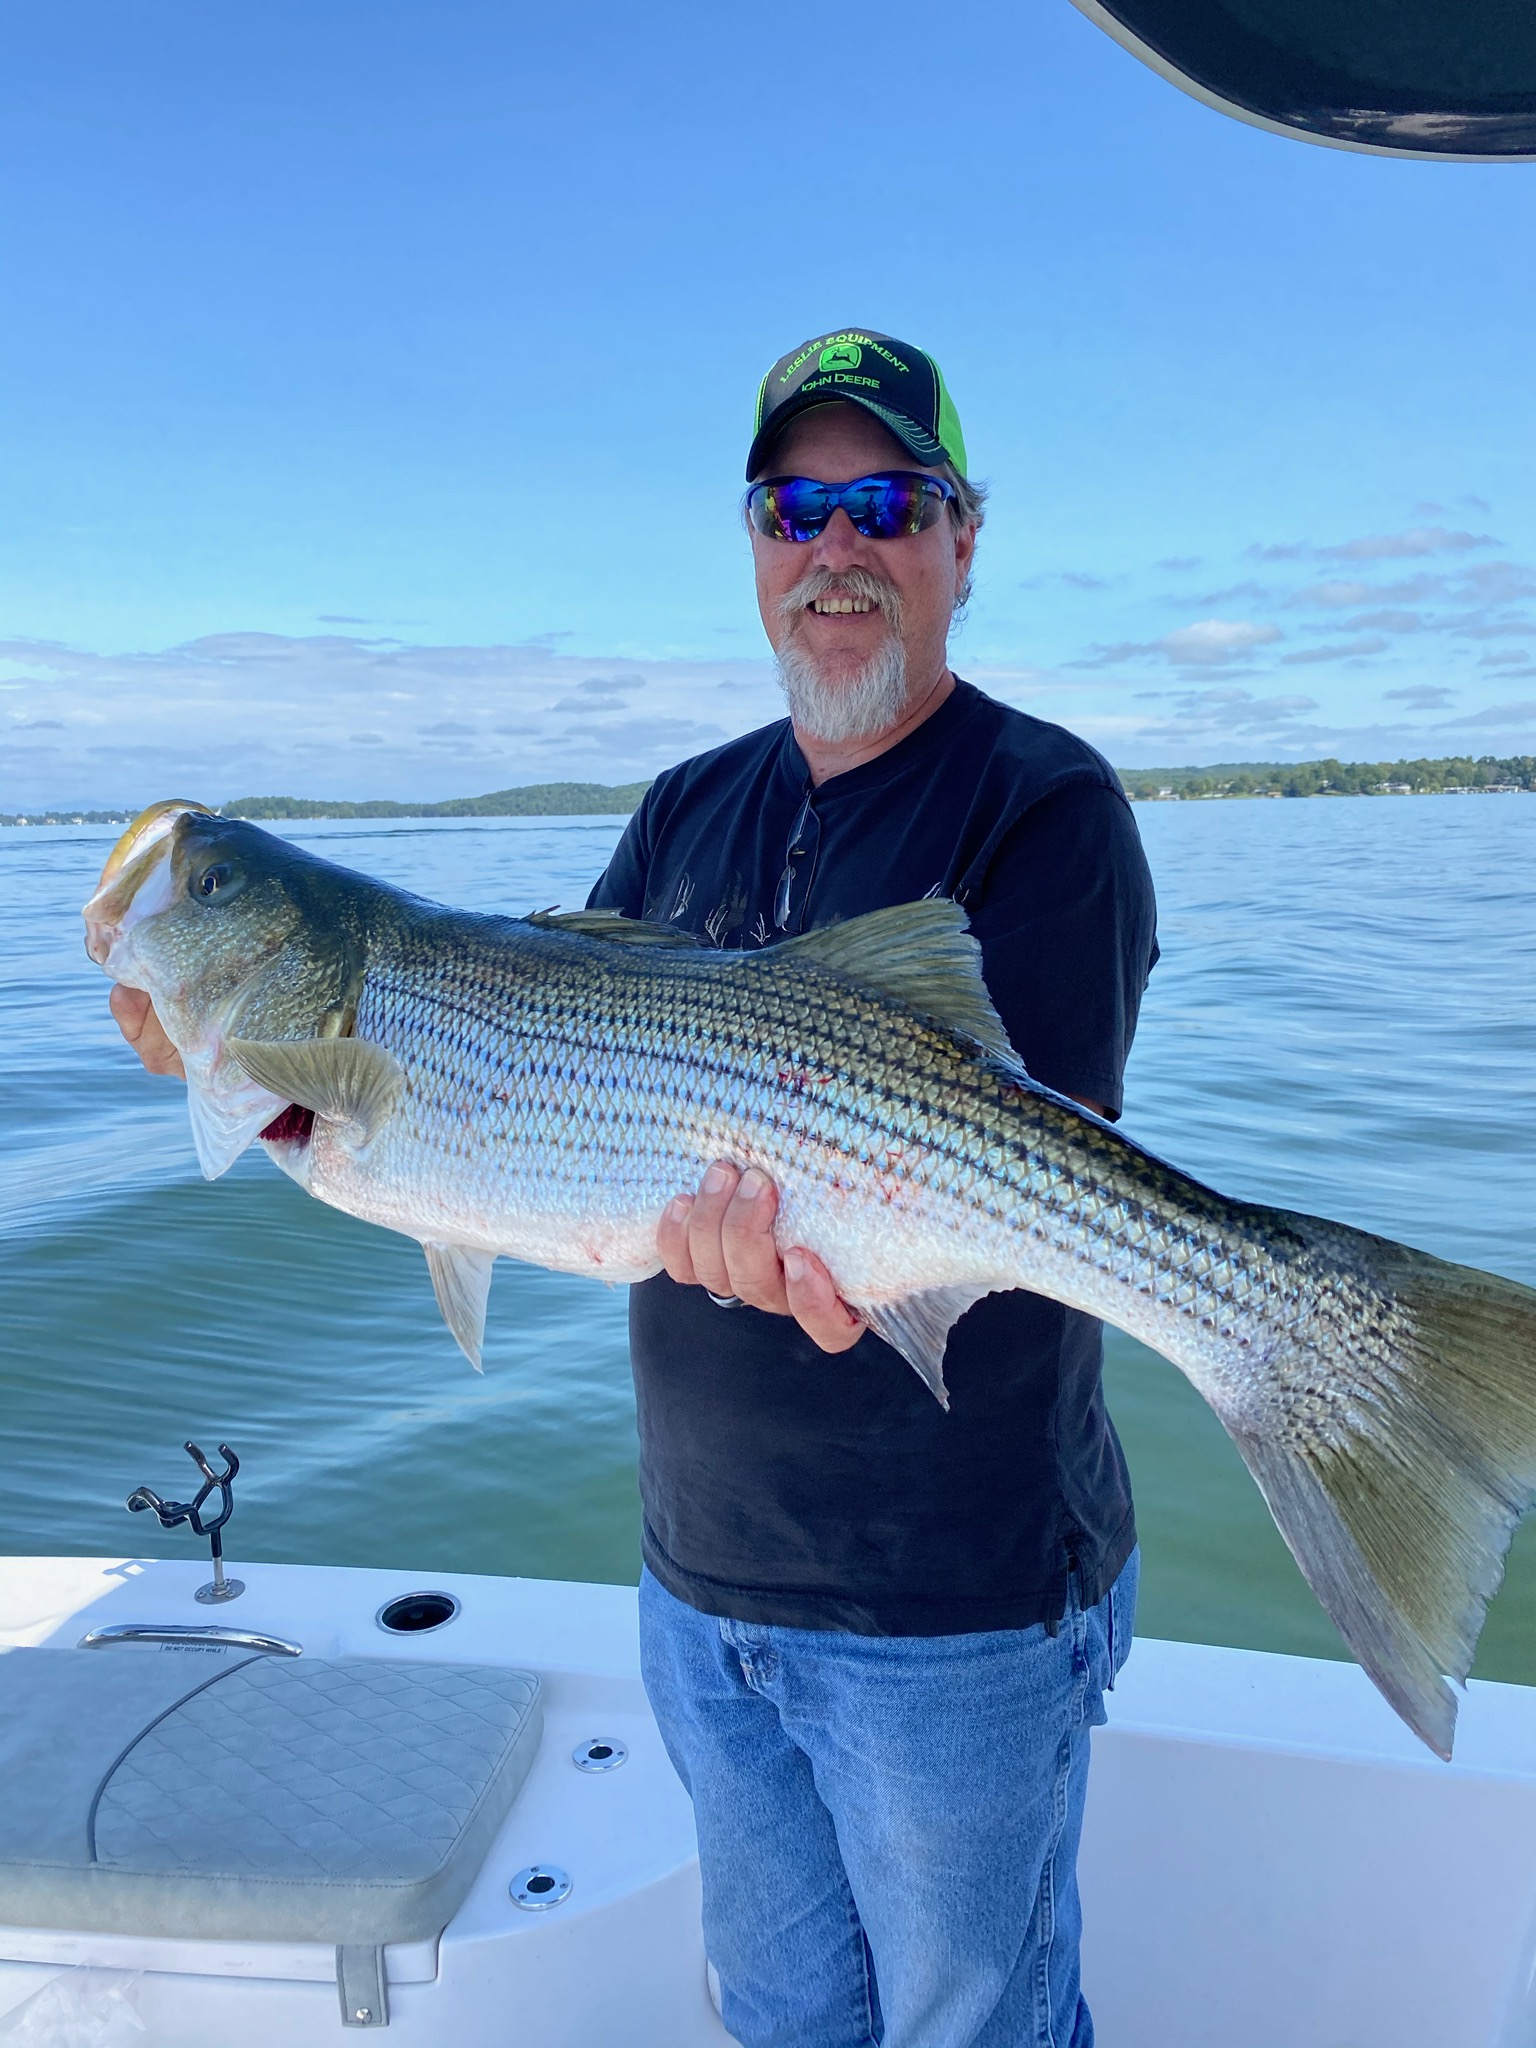 Fishing for Stripers at Smith Mountain Lake